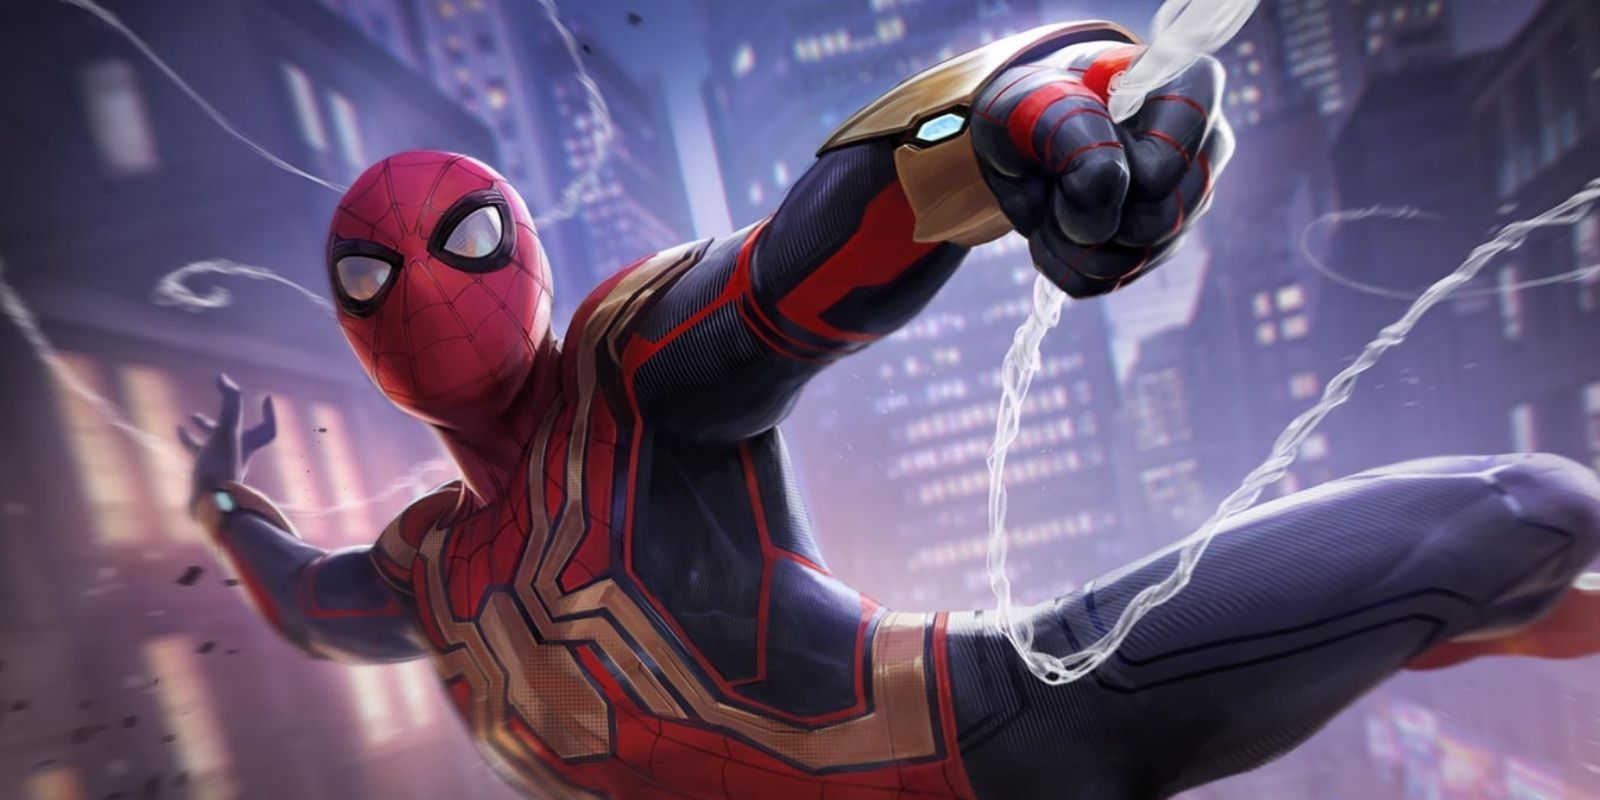 Spider-Man swinging into action in Marvel Future Fight